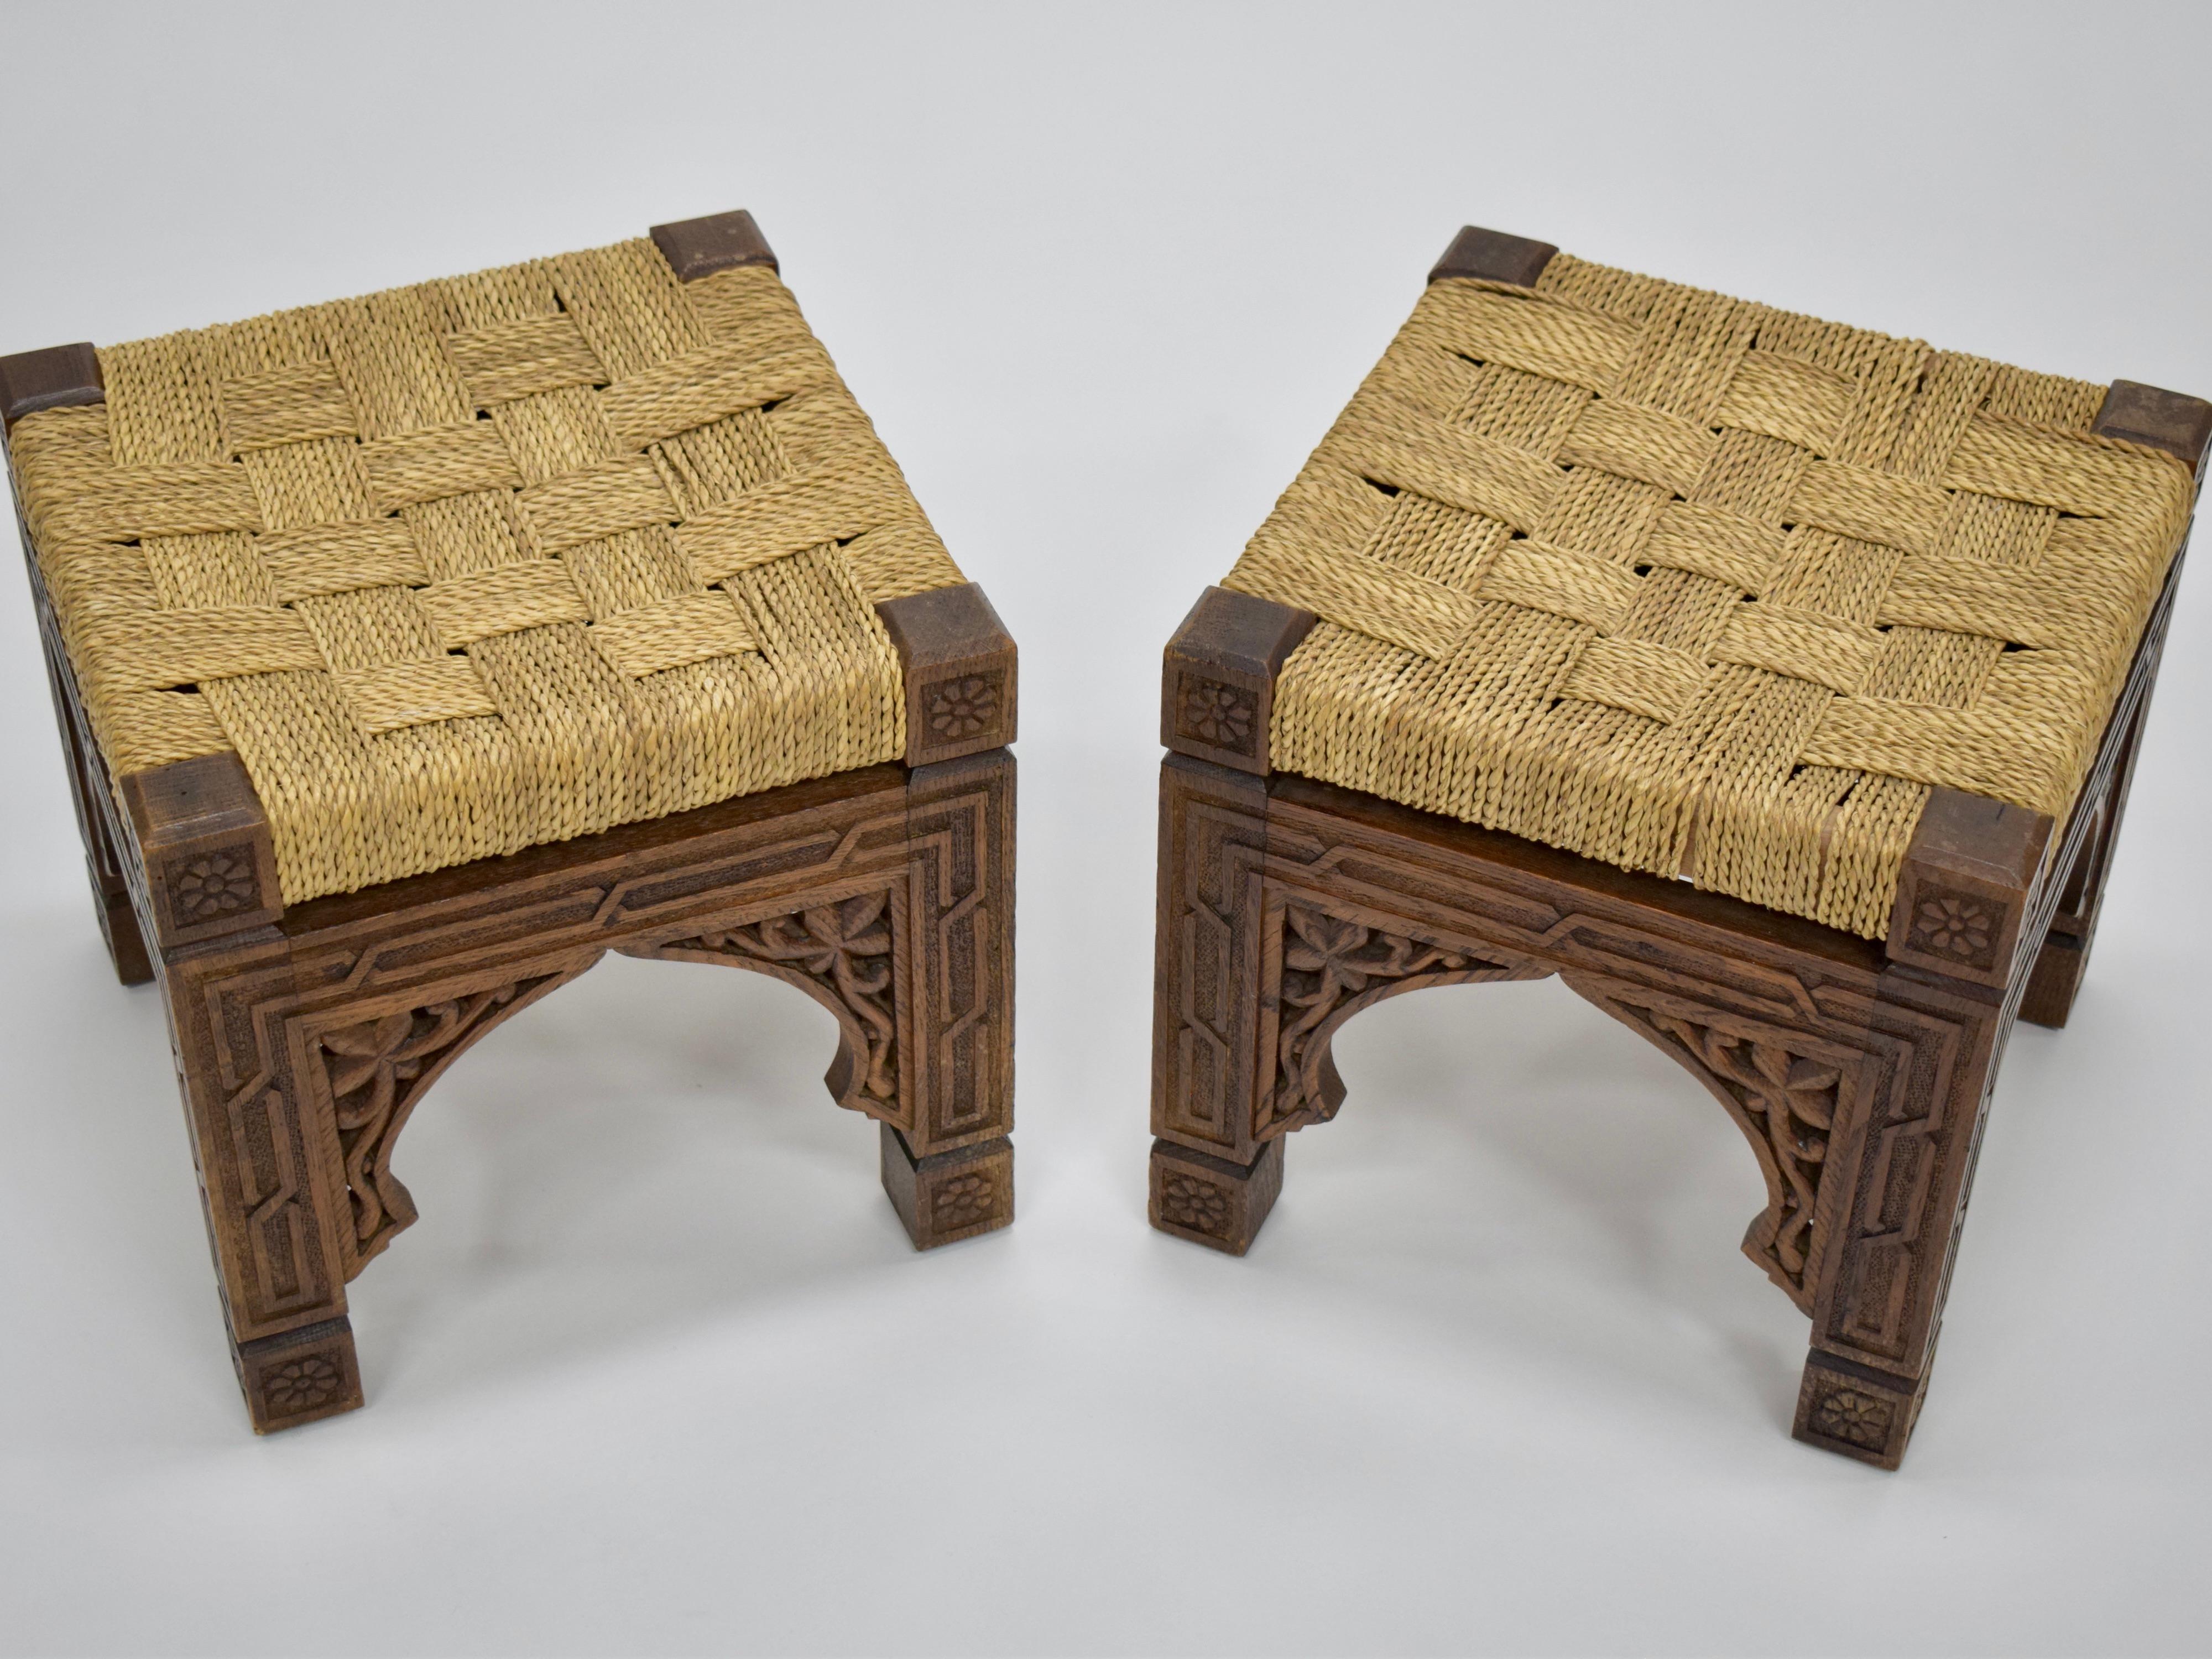 A pair of beautiful square carved wood stools with woven Danish cording seats. Found in France. The seats were crafted using a classic grid weave, while the intricate carvings on the base evoke Moroccan archways and floral motifs. 

